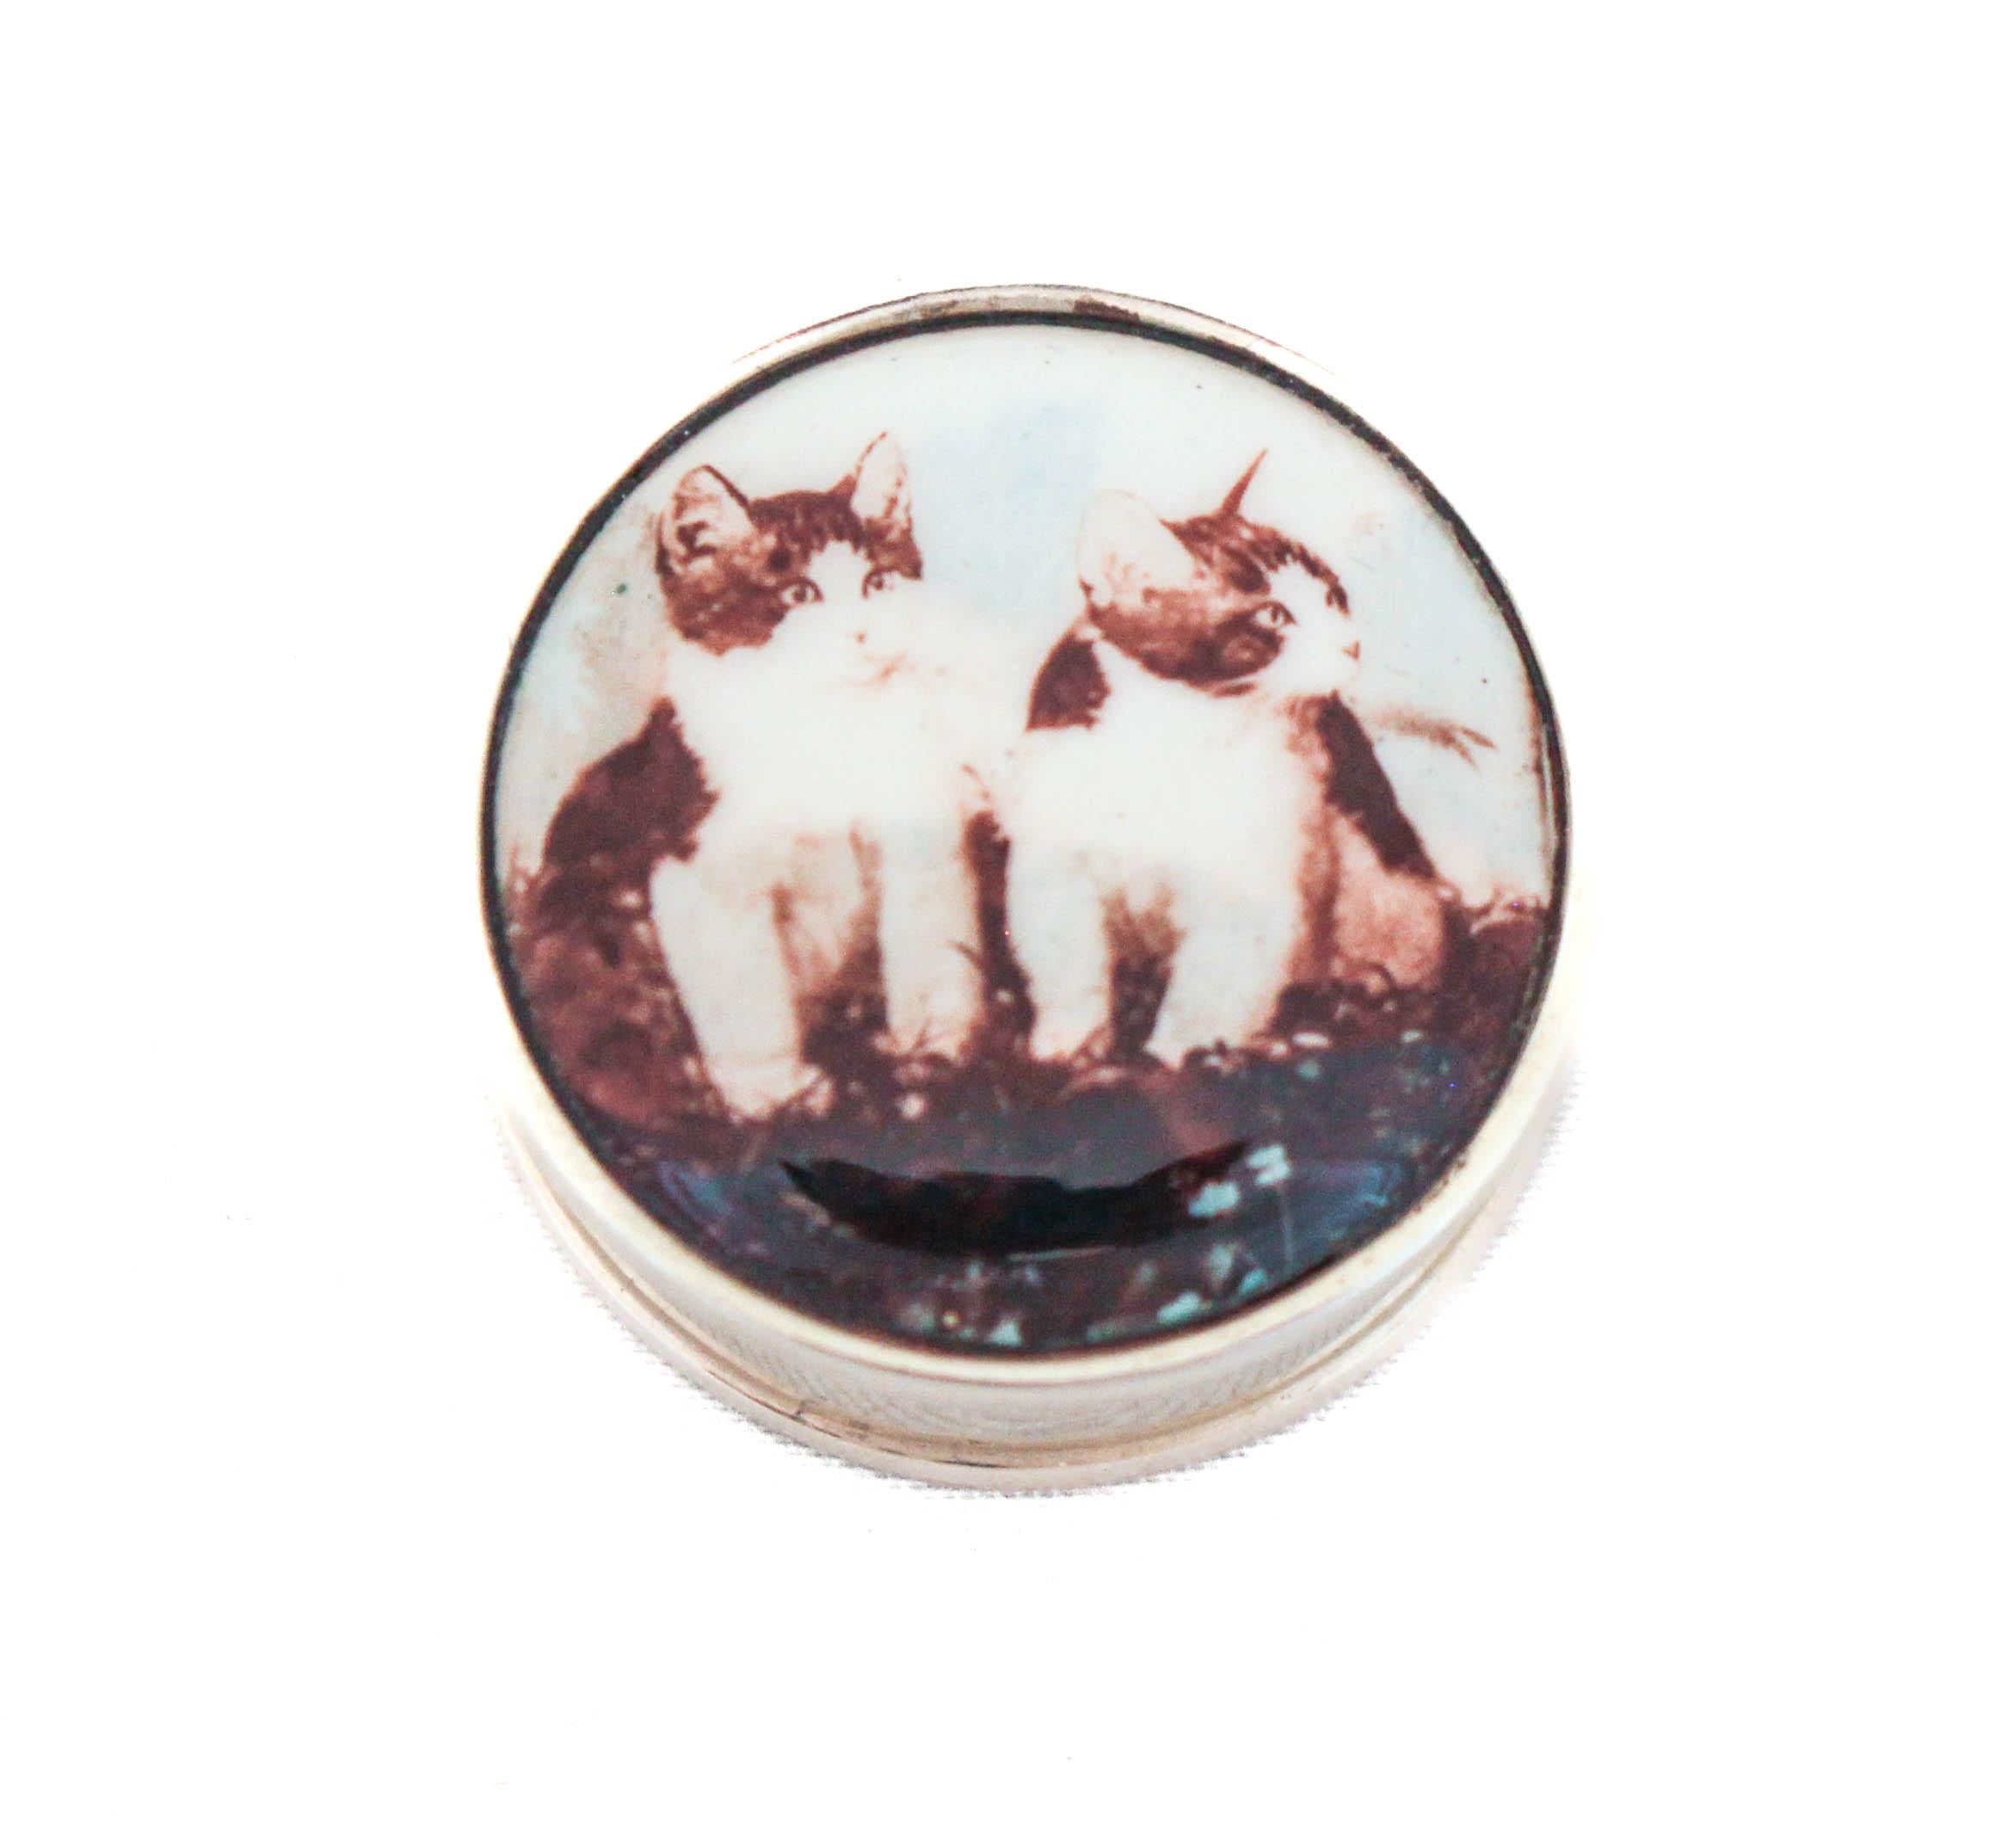 Being offered is a sterling silver pill box made in England.  It has an enamel top with two kittens on it.  The lid is attached to the box through a back hinge preventing you from losing it.  The pillbox is new and in mint condition.